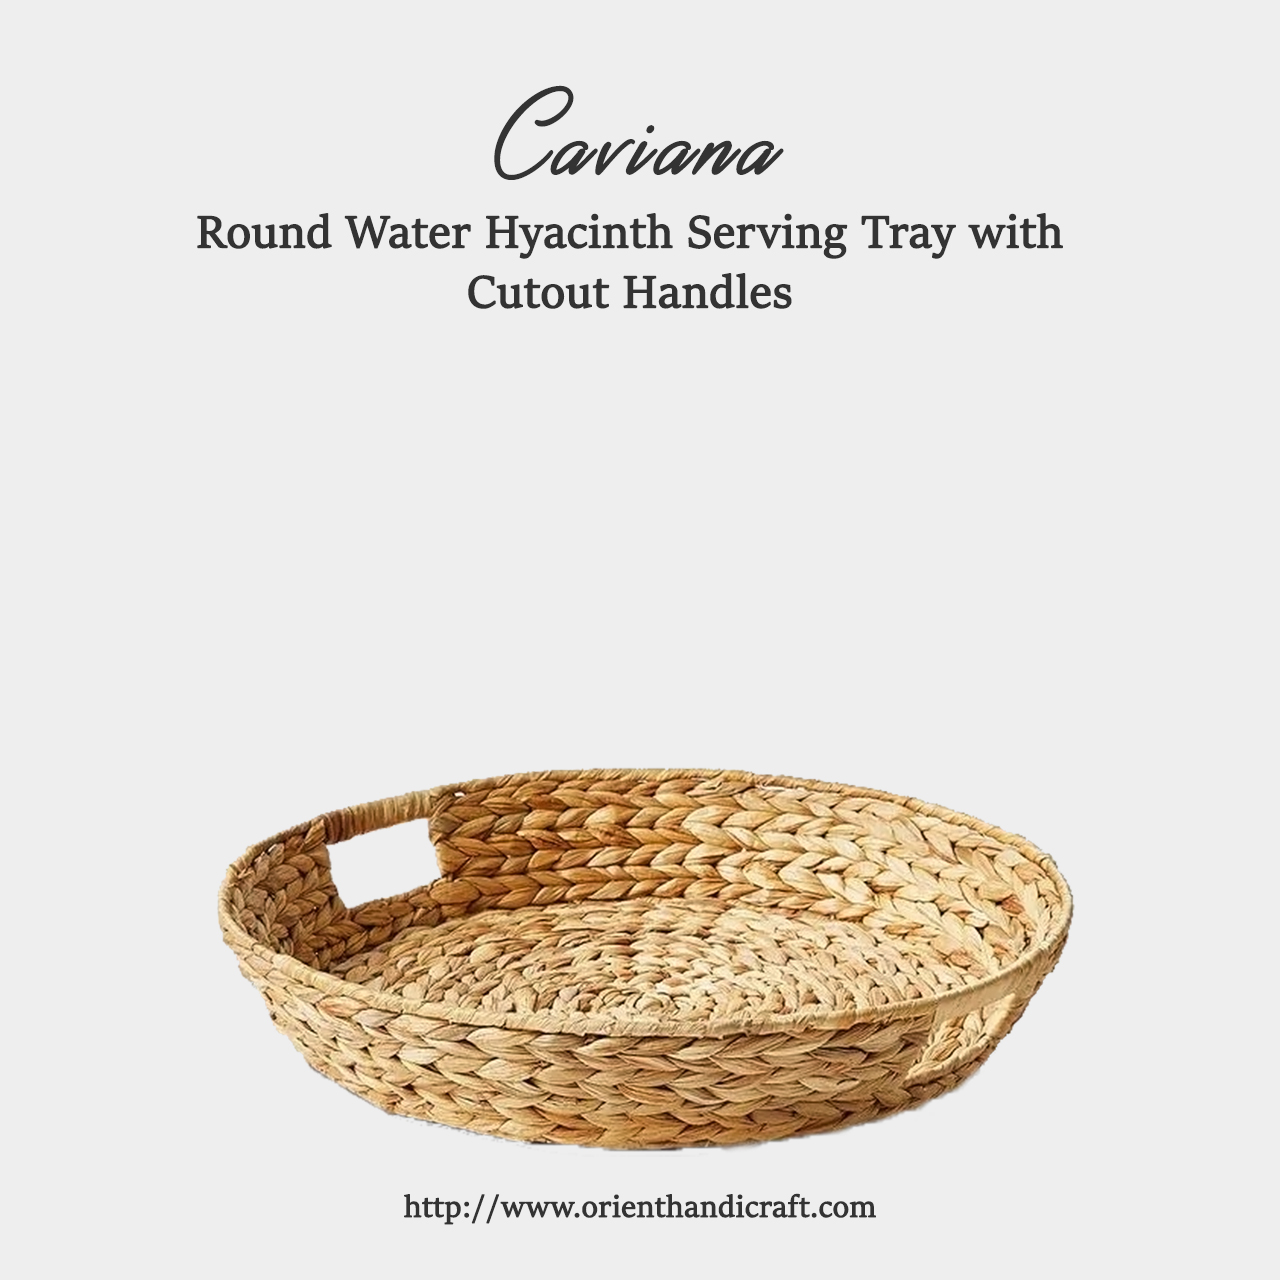 Round Water Hyacinth Serving Tray With Handles